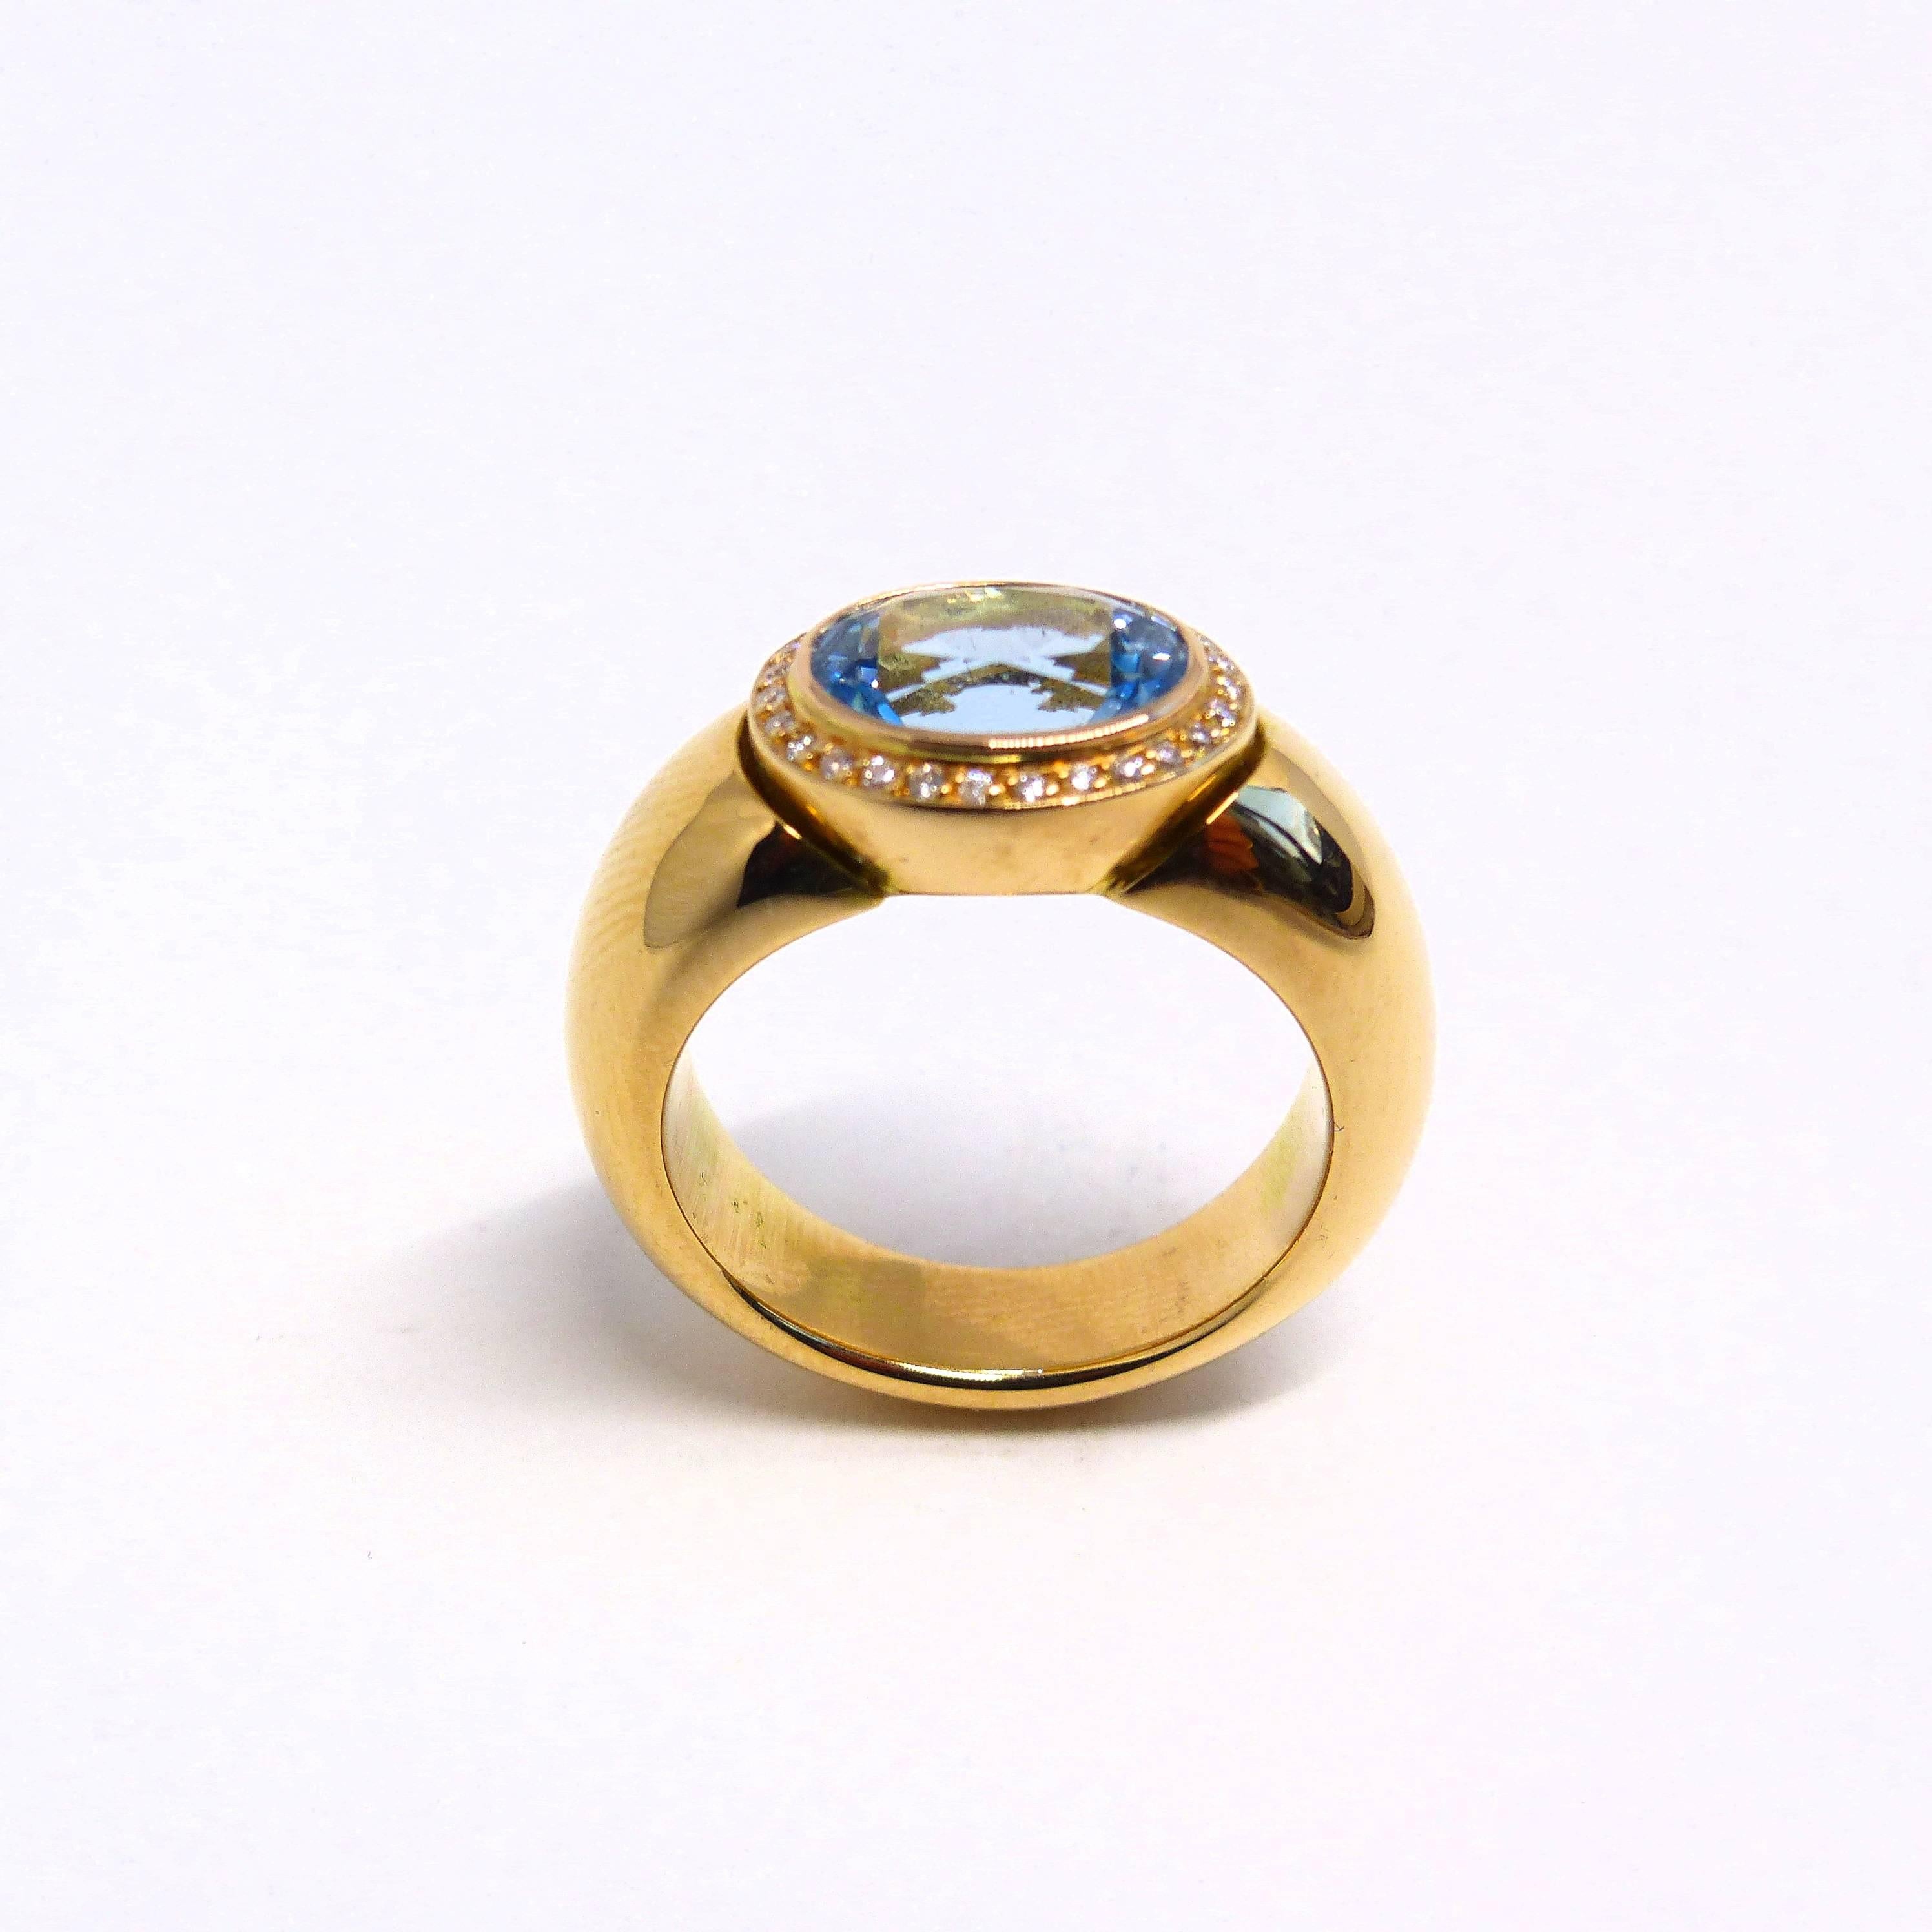 Thomas Leyser is renowned for his contemporary jewellery designs utilizing fine coloured gemstones and diamonds. 

This ring in 18k rose gold is set with 1x fine Aquamarine (oval, facetted, 10x8mm, 2.61ct) + 26x Diamonds (brillant-cut, 1mm, G/VS,